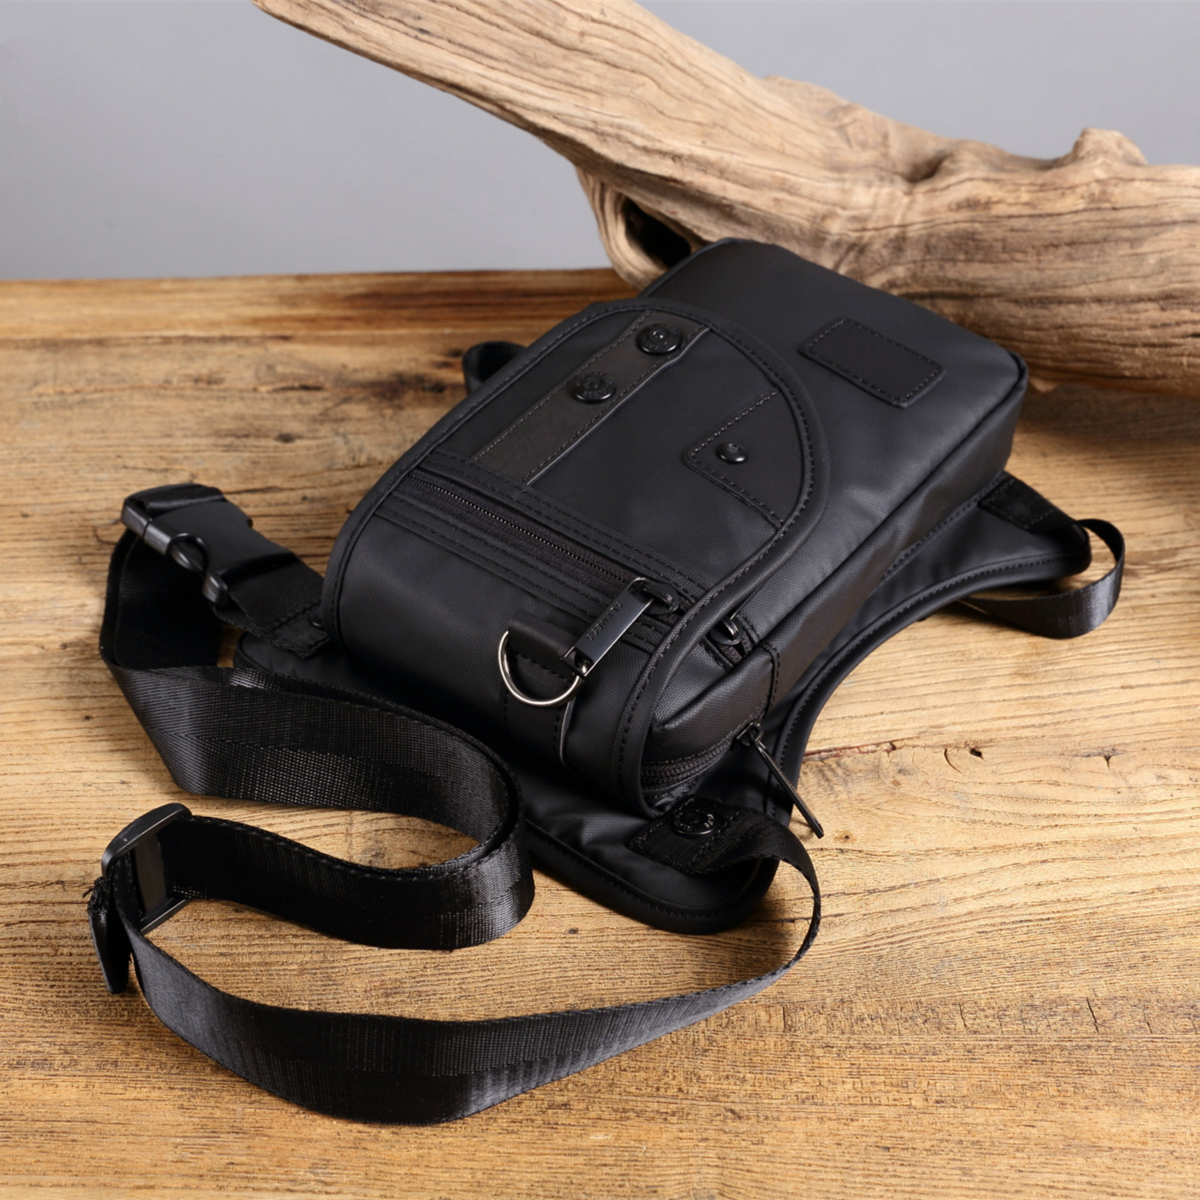 Outdoor-Military-Oxford-Tactical-Bag-Camping-Waist-Belt-Bag-Sports-EDC-Outdoor-Sport-Bags-For-Travel-1715653-2